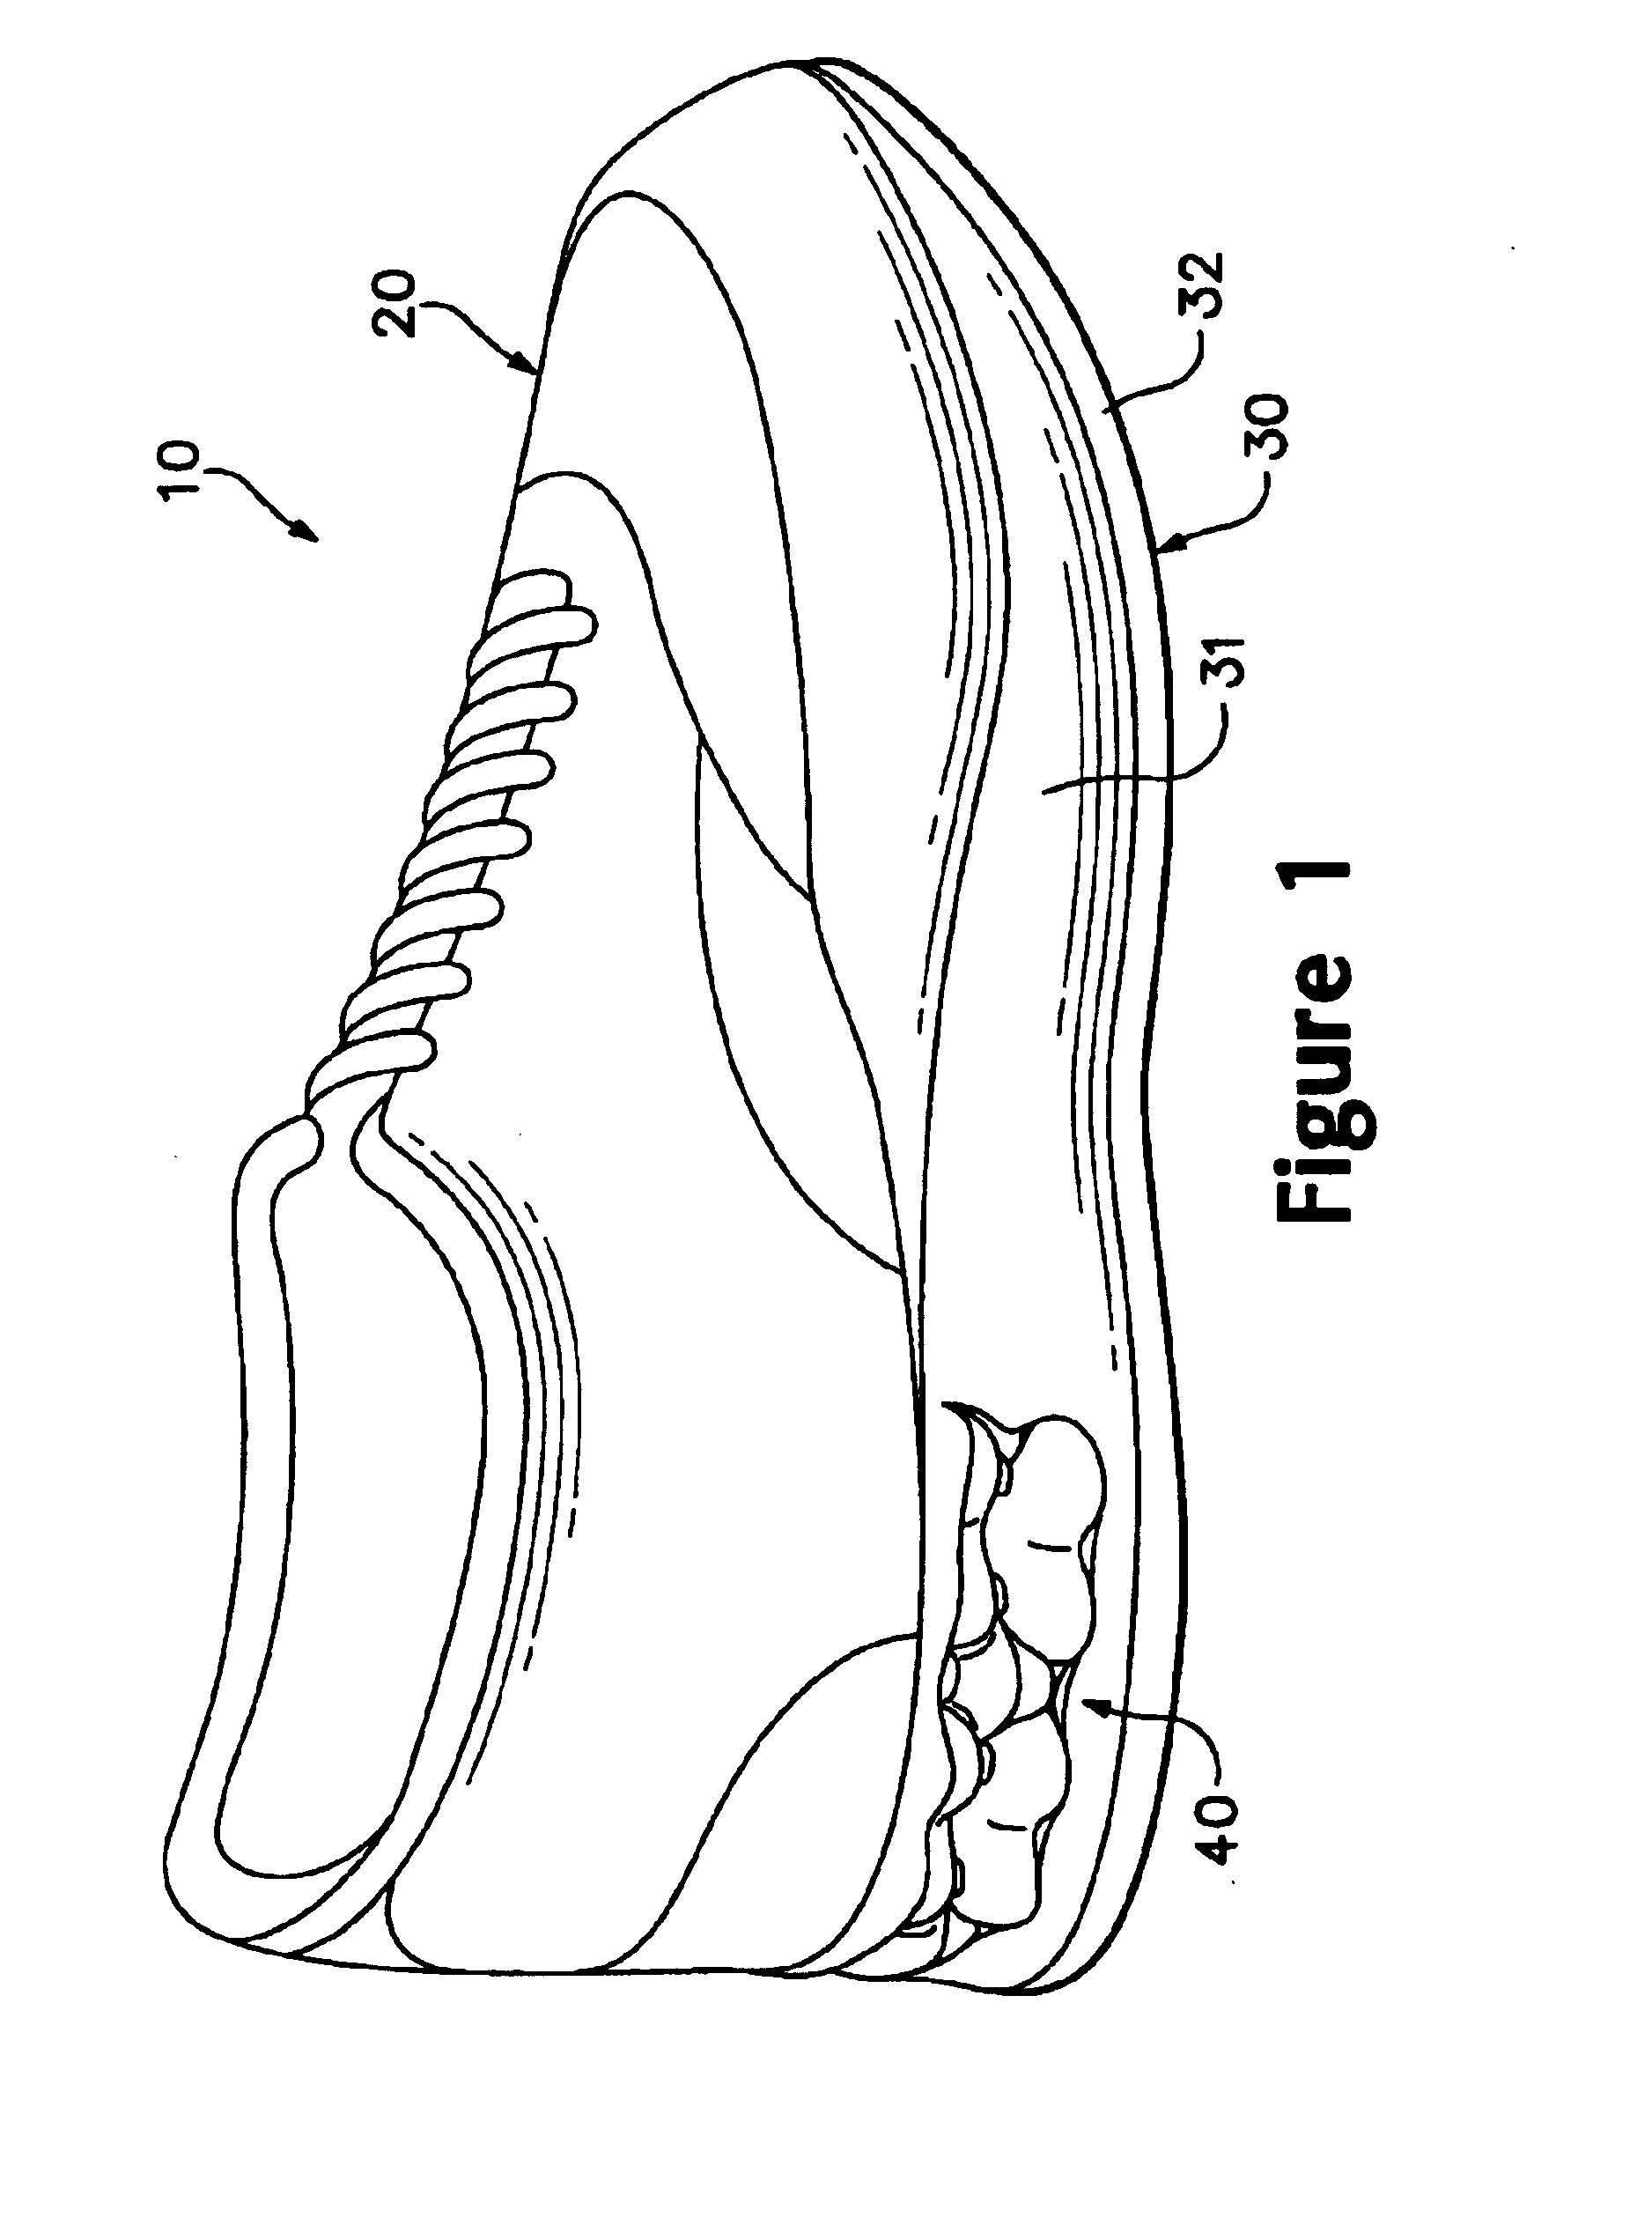 Footwear sole structure incorporating a cushioning component